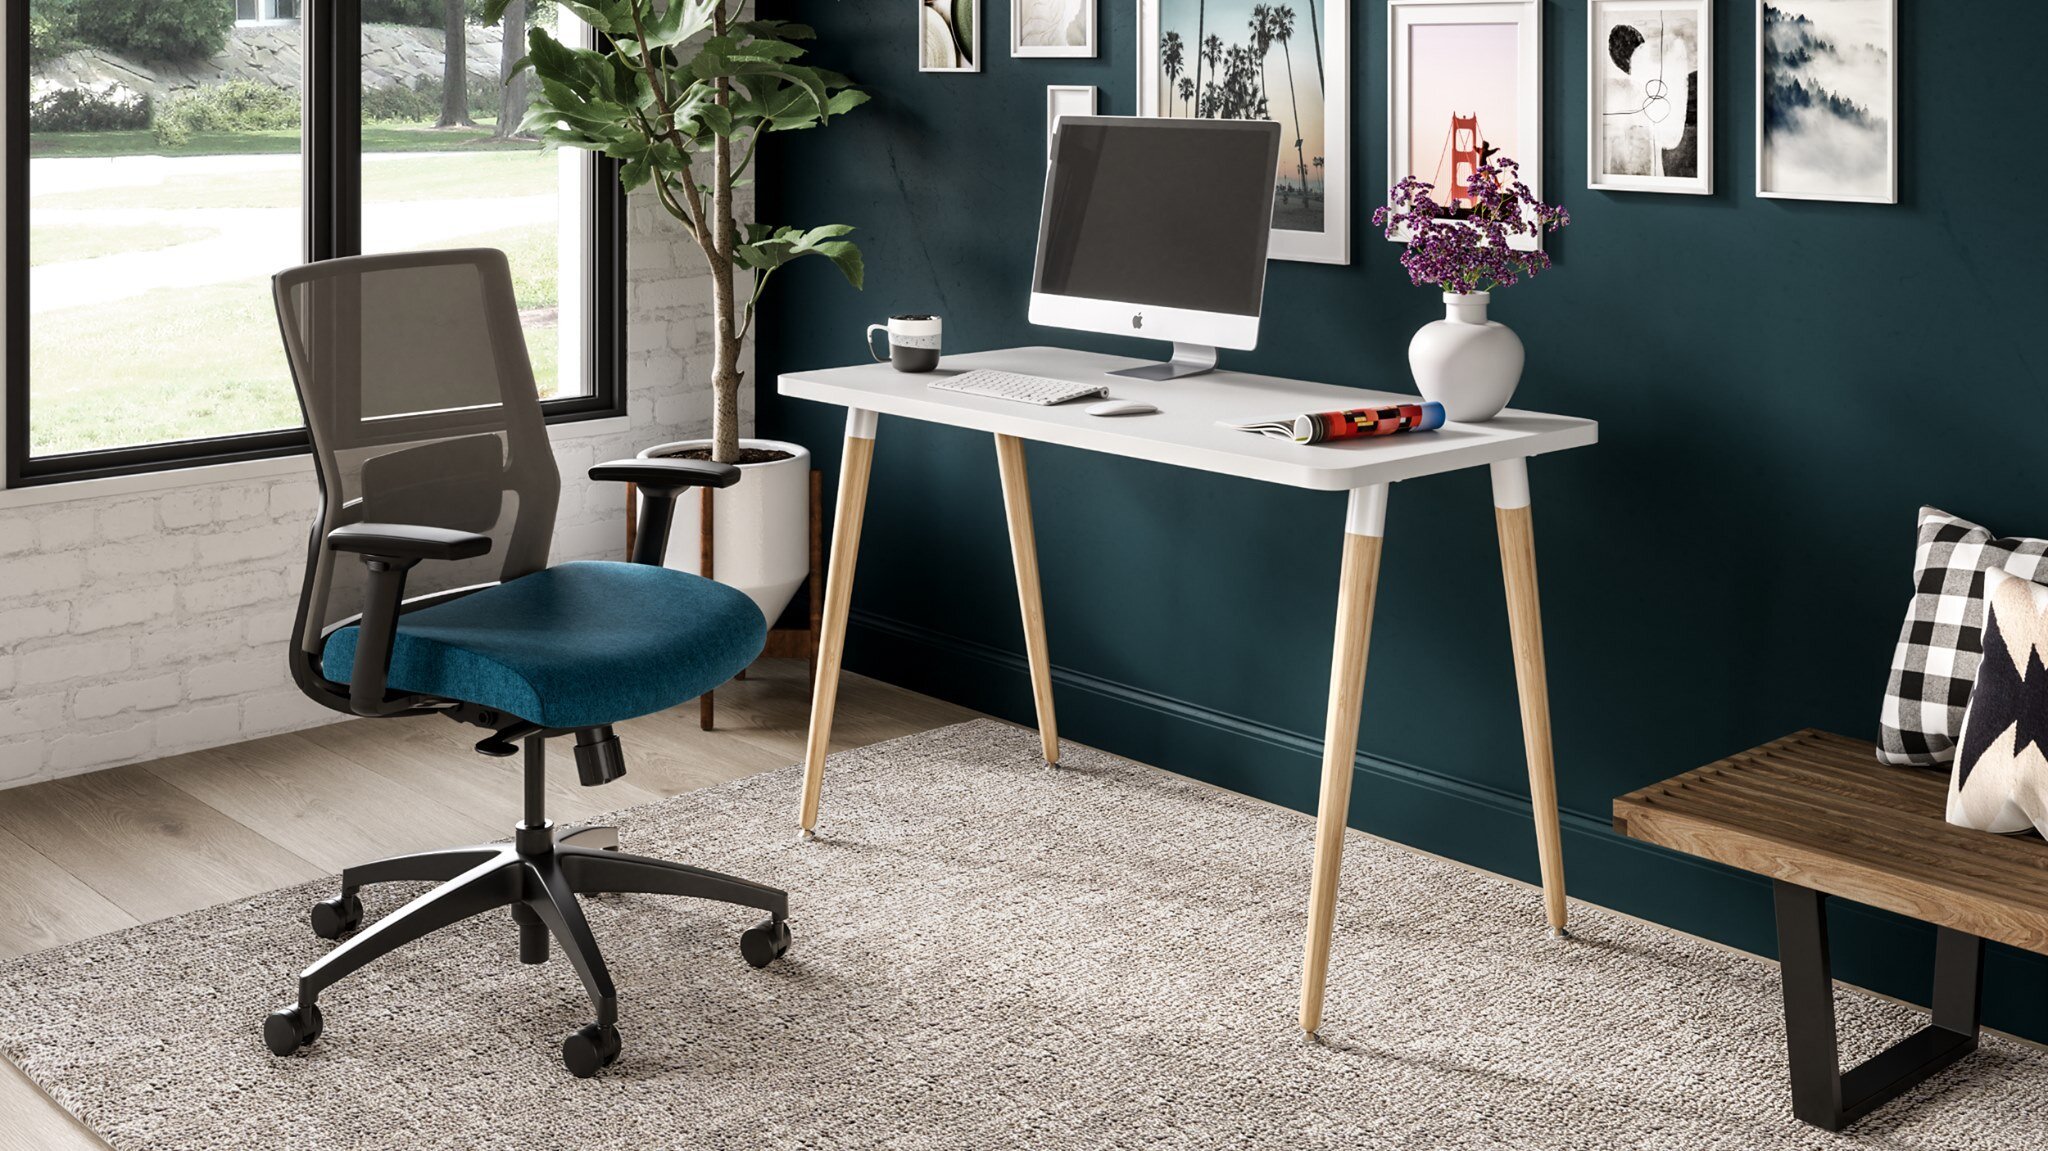 7 Things Every Home Office Needs